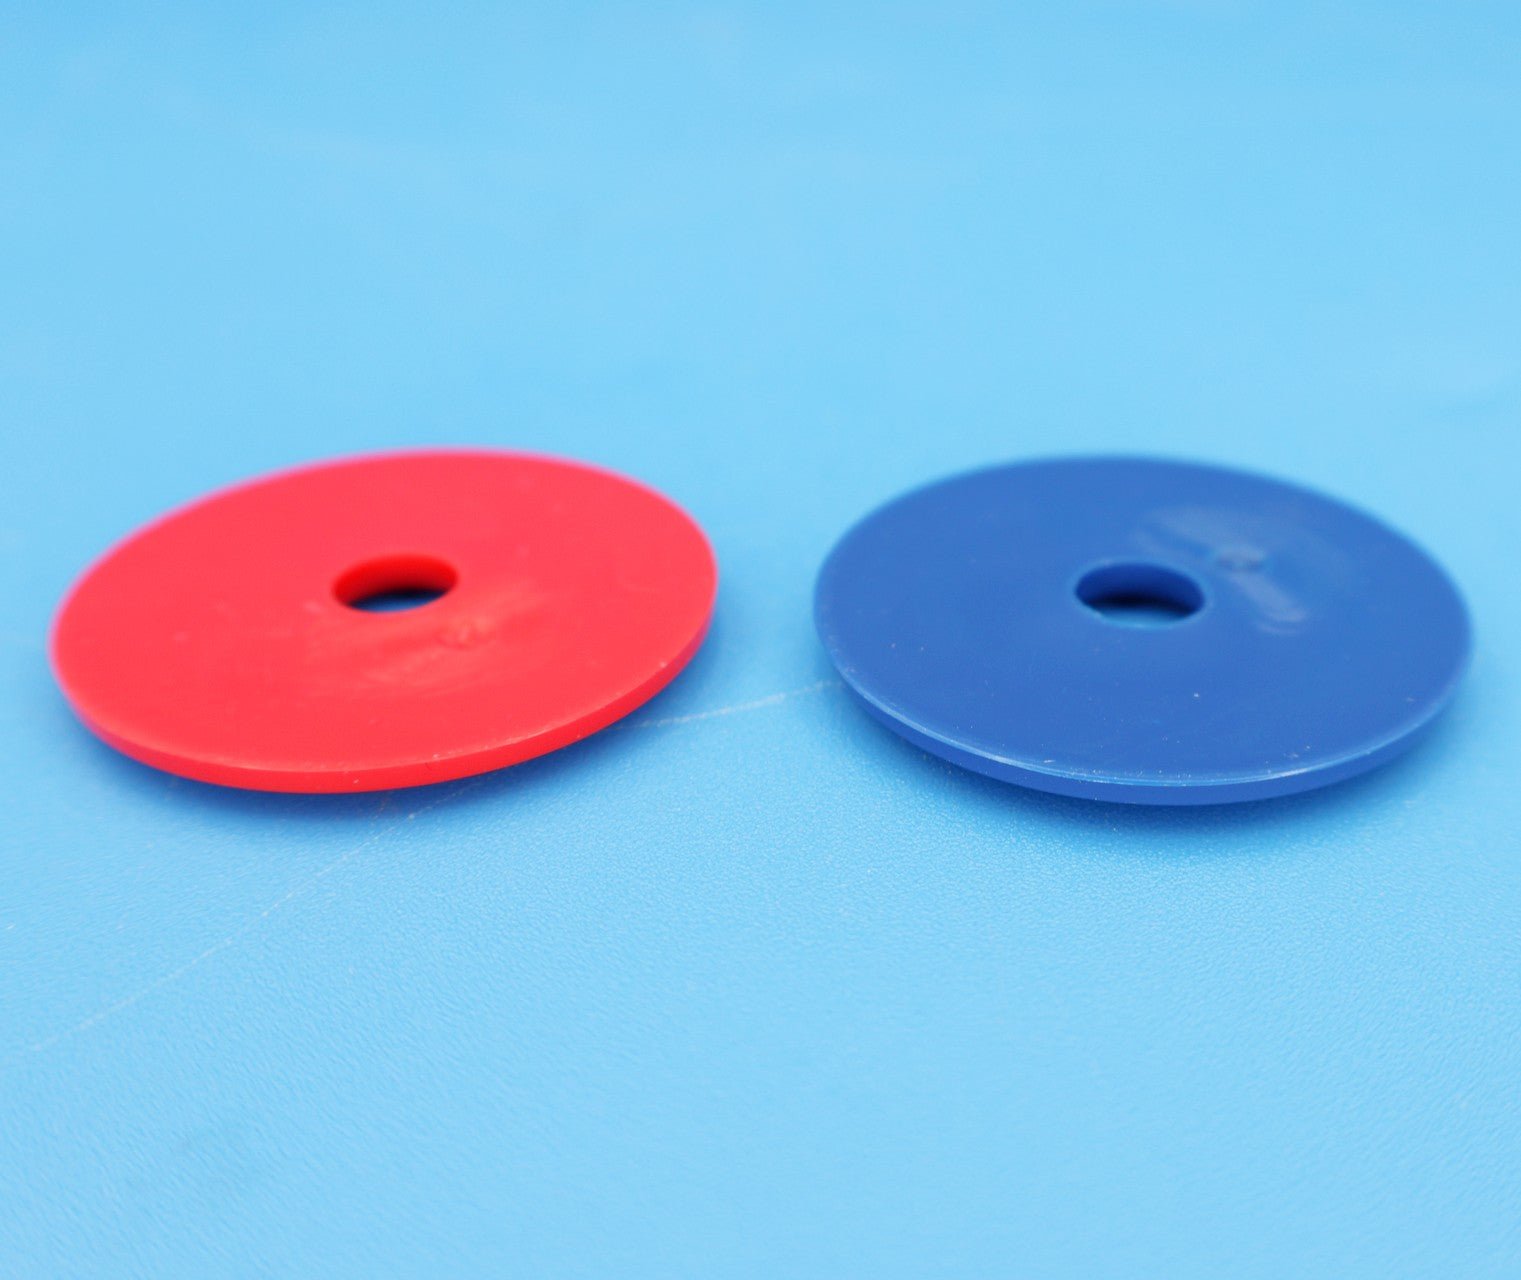 Jandy (Polaris) Vac-Sweep Red & Blue Restrictor Disk for Wall Fittings 10-112-00 - Cleaner Parts - img-2